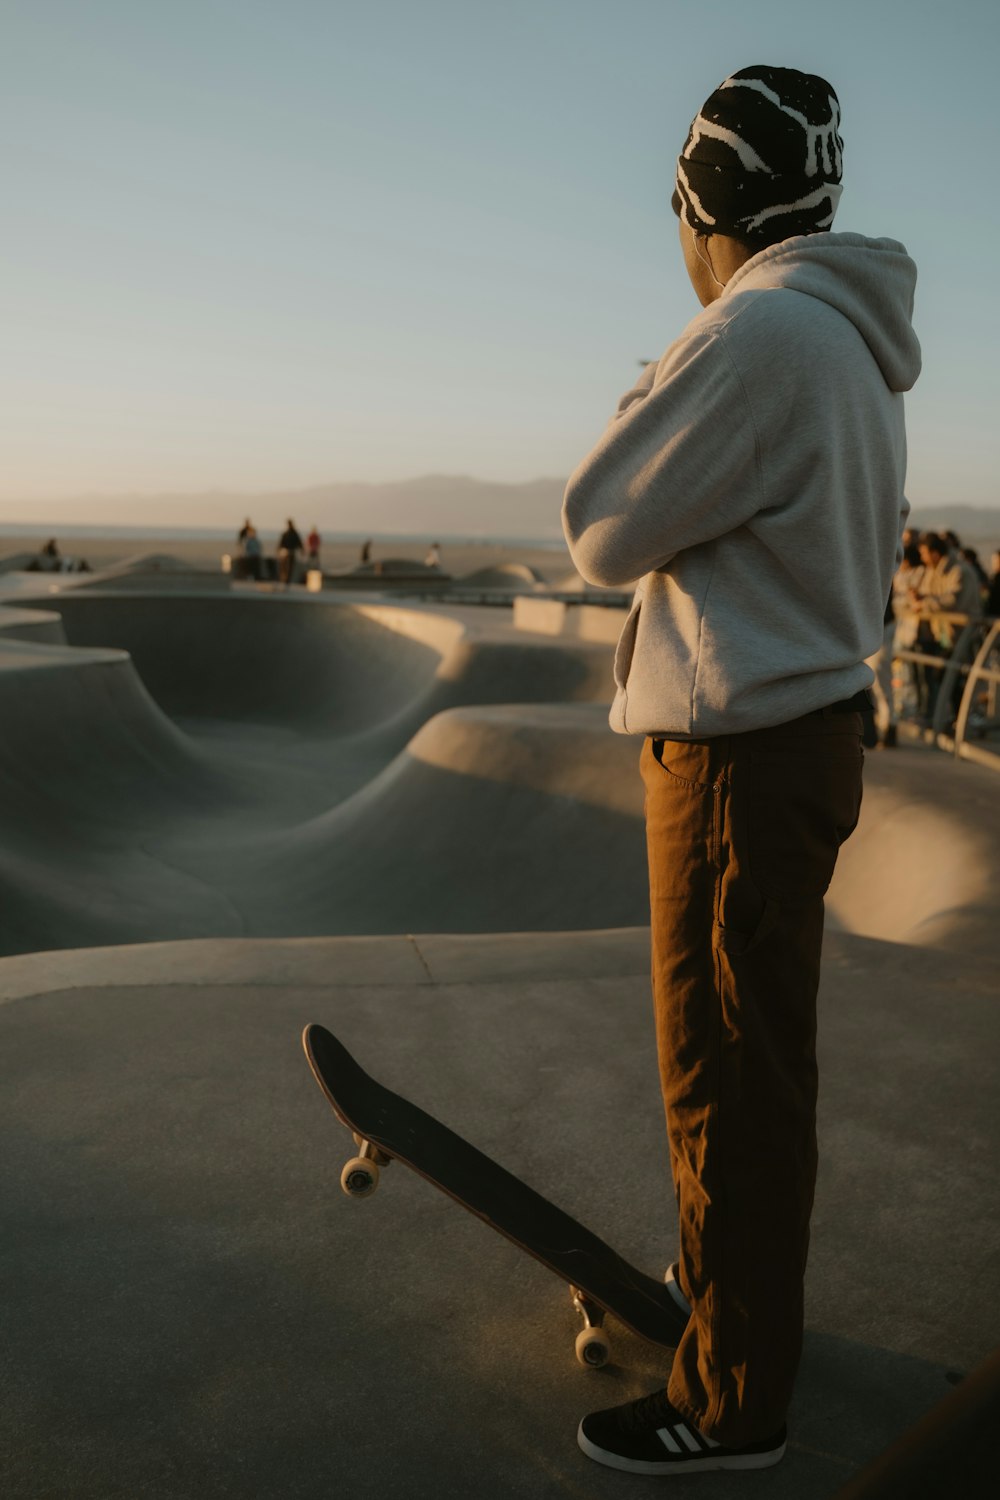 a person standing on a skateboard at a skate park